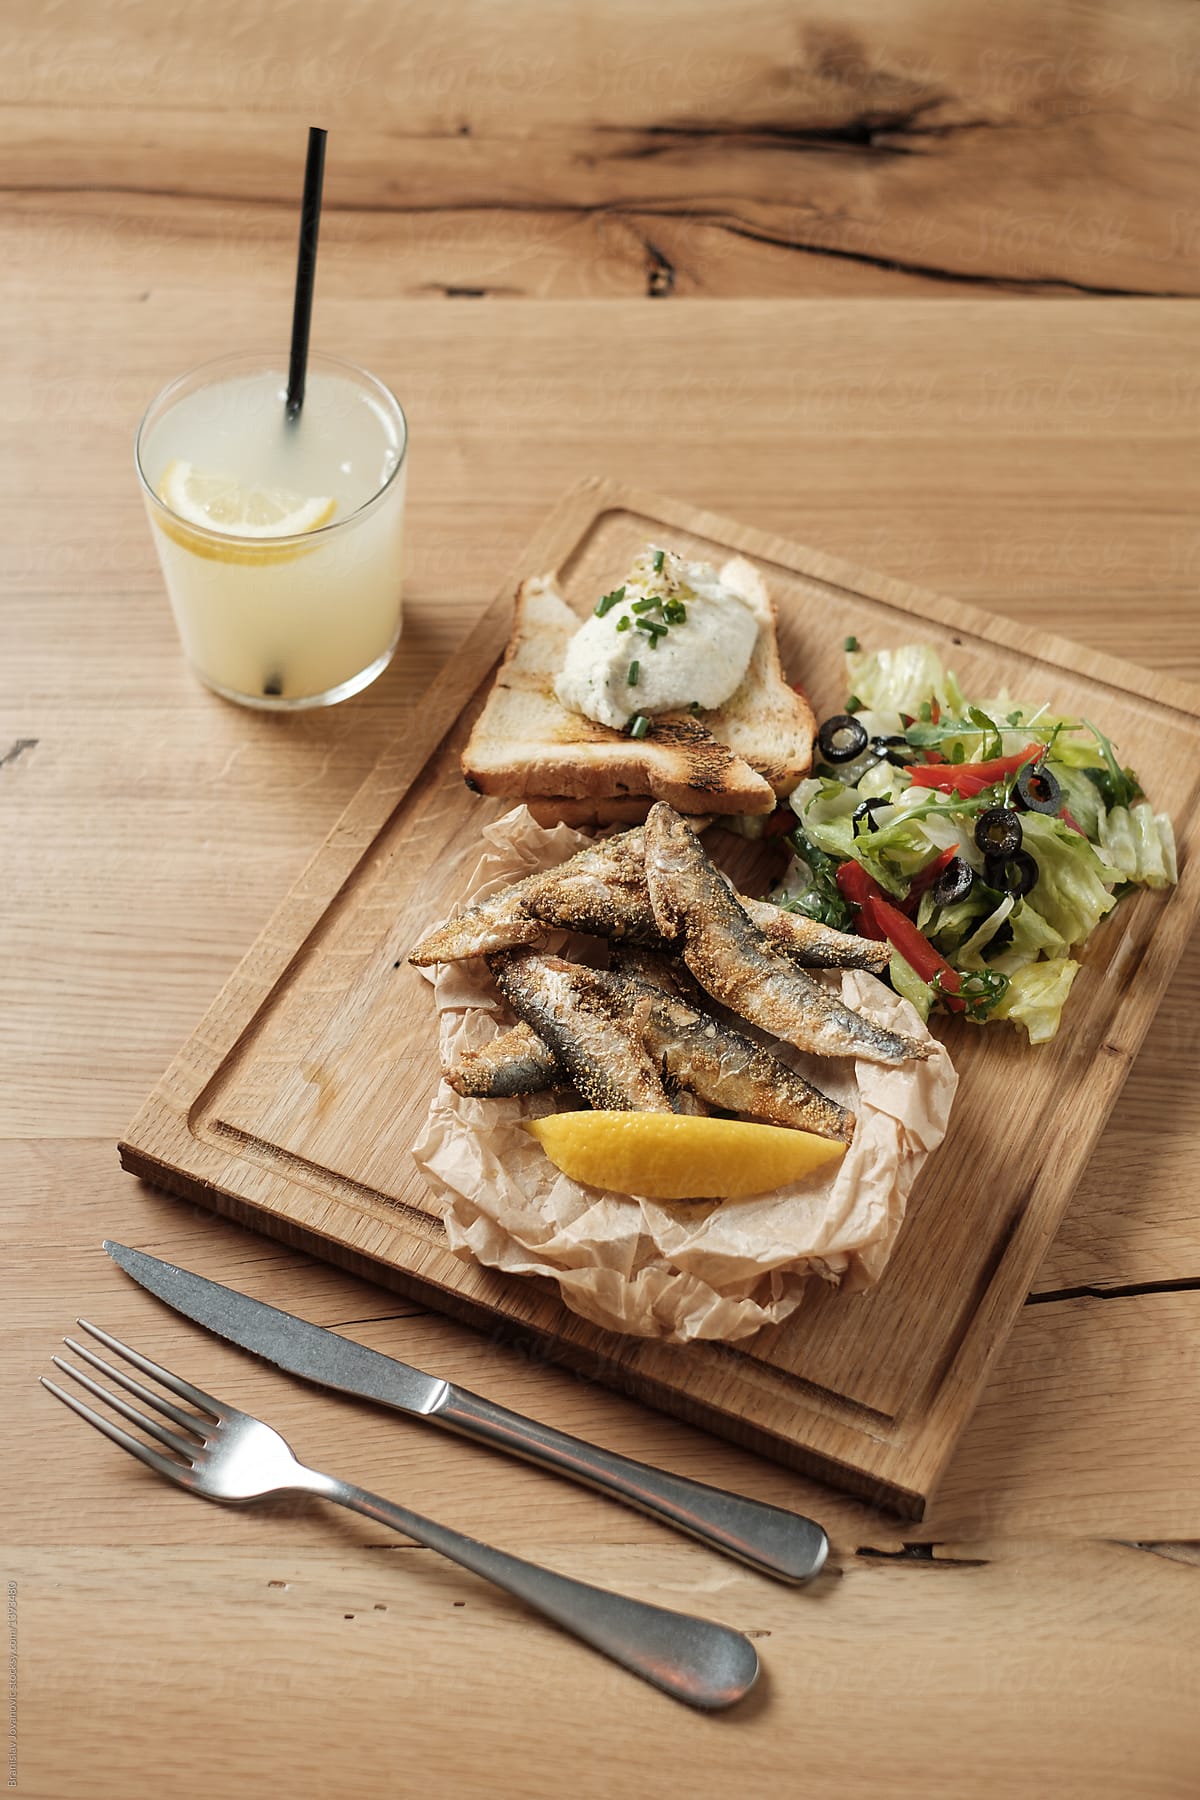 Fried Fish And Salad On The Wooden Board